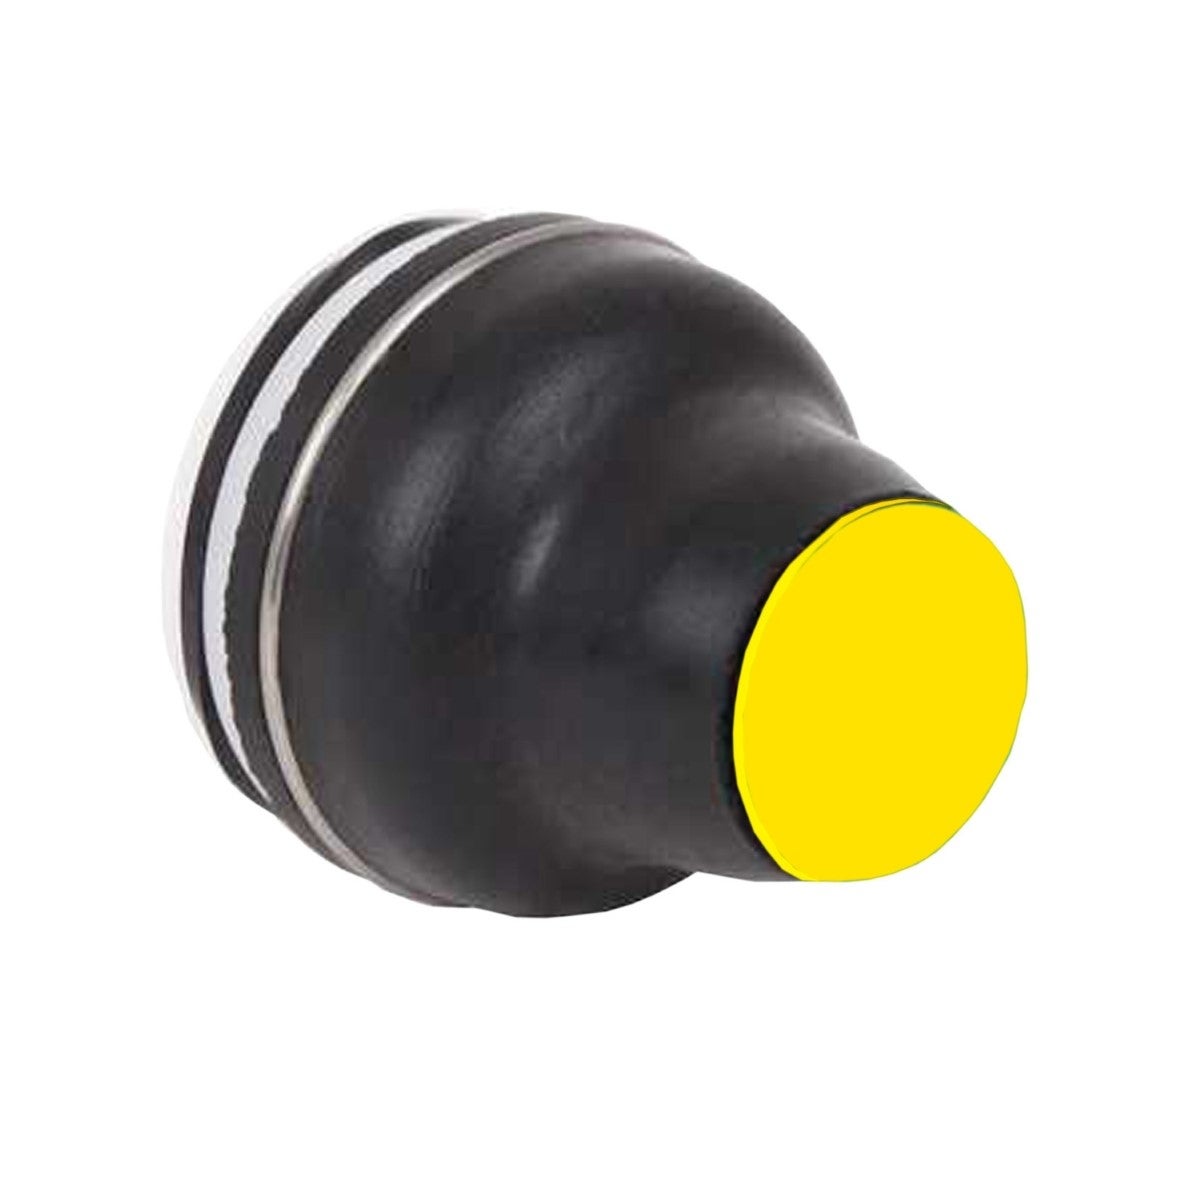 booted head for pushbutton XAC-B - yellow - 16 mm, -25..+70 °C